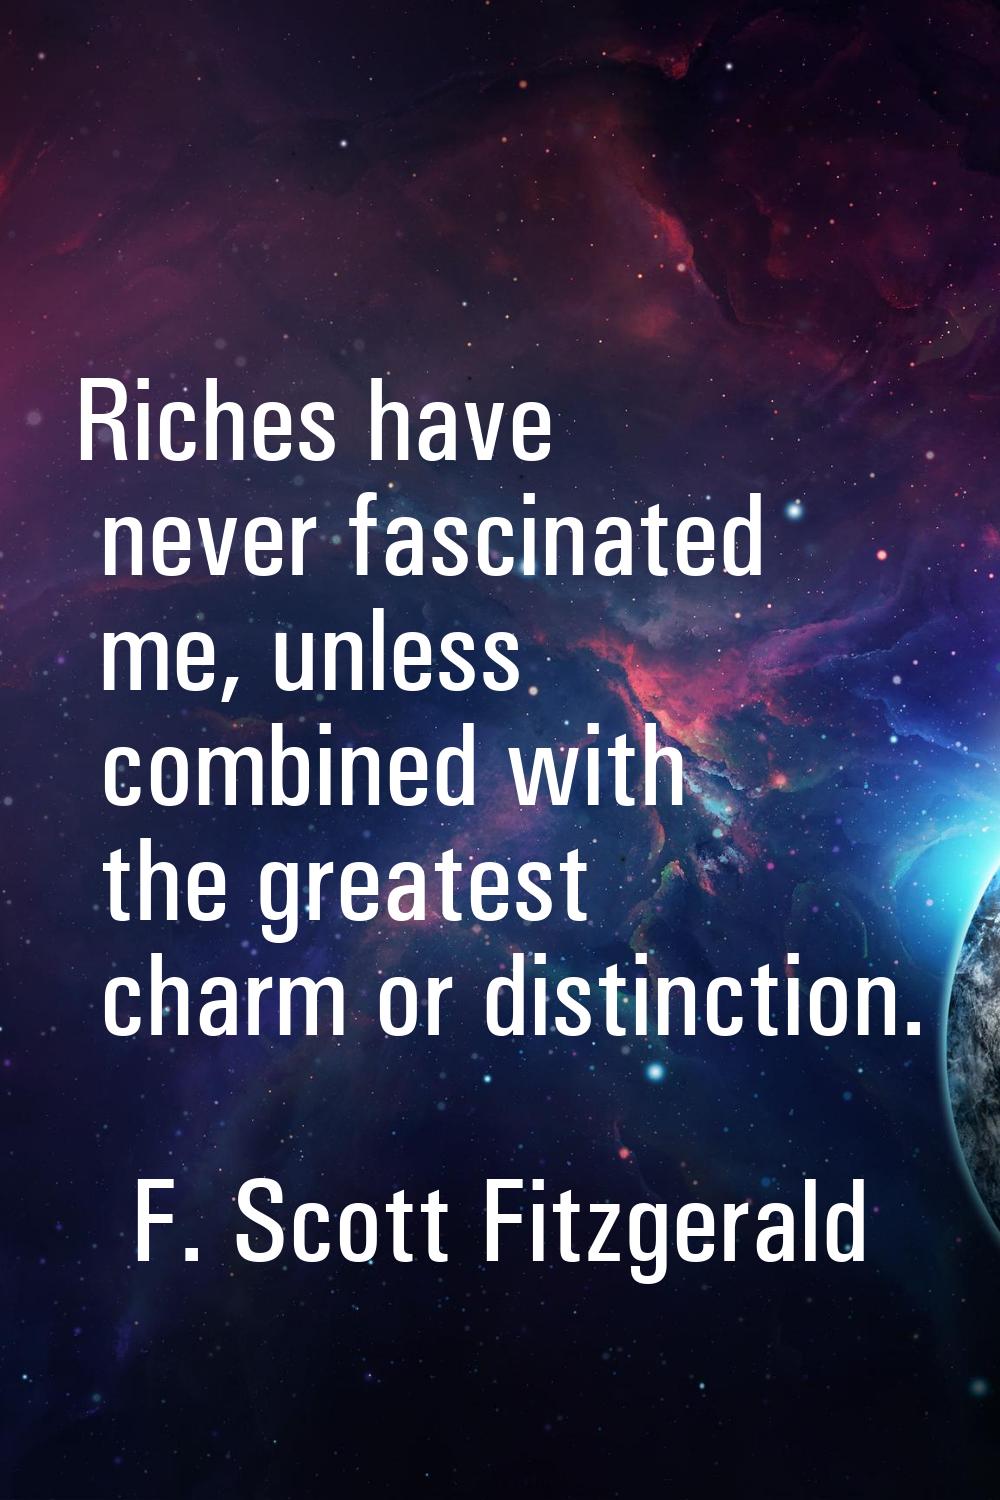 Riches have never fascinated me, unless combined with the greatest charm or distinction.